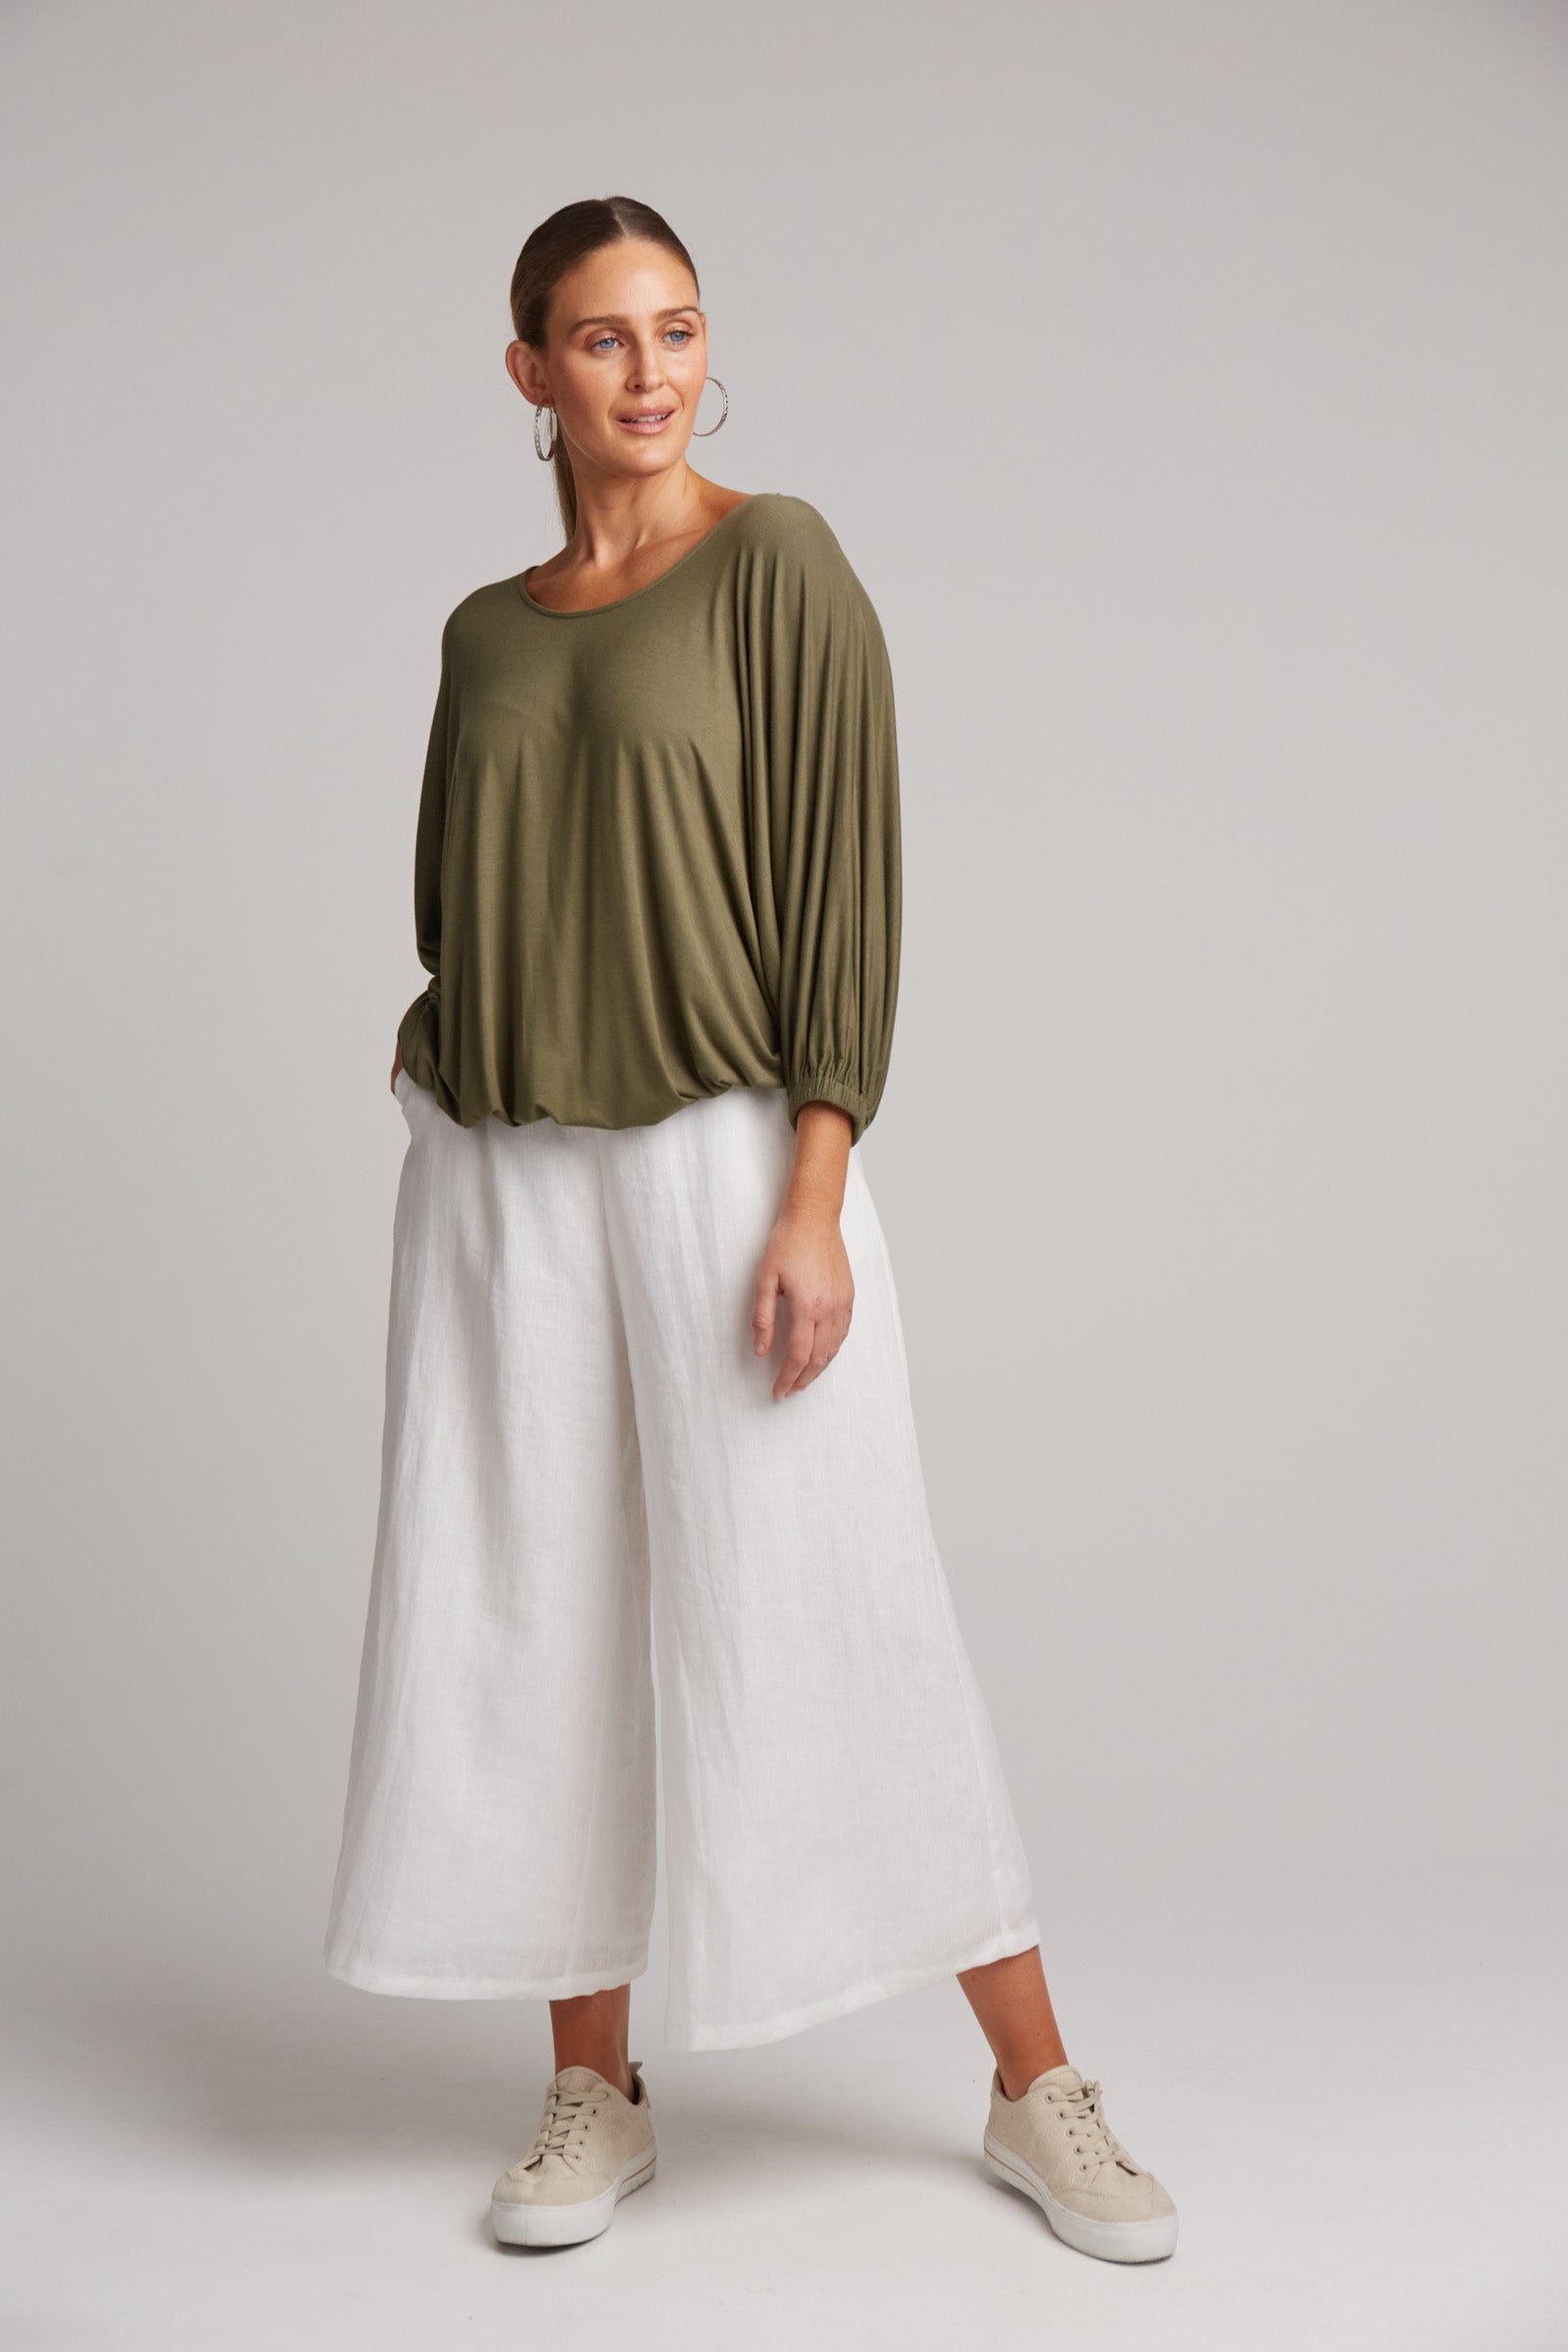 Studio Jersey Relaxed Top - Fern - eb&ive Clothing - Top 3/4 Sleeve Jersey